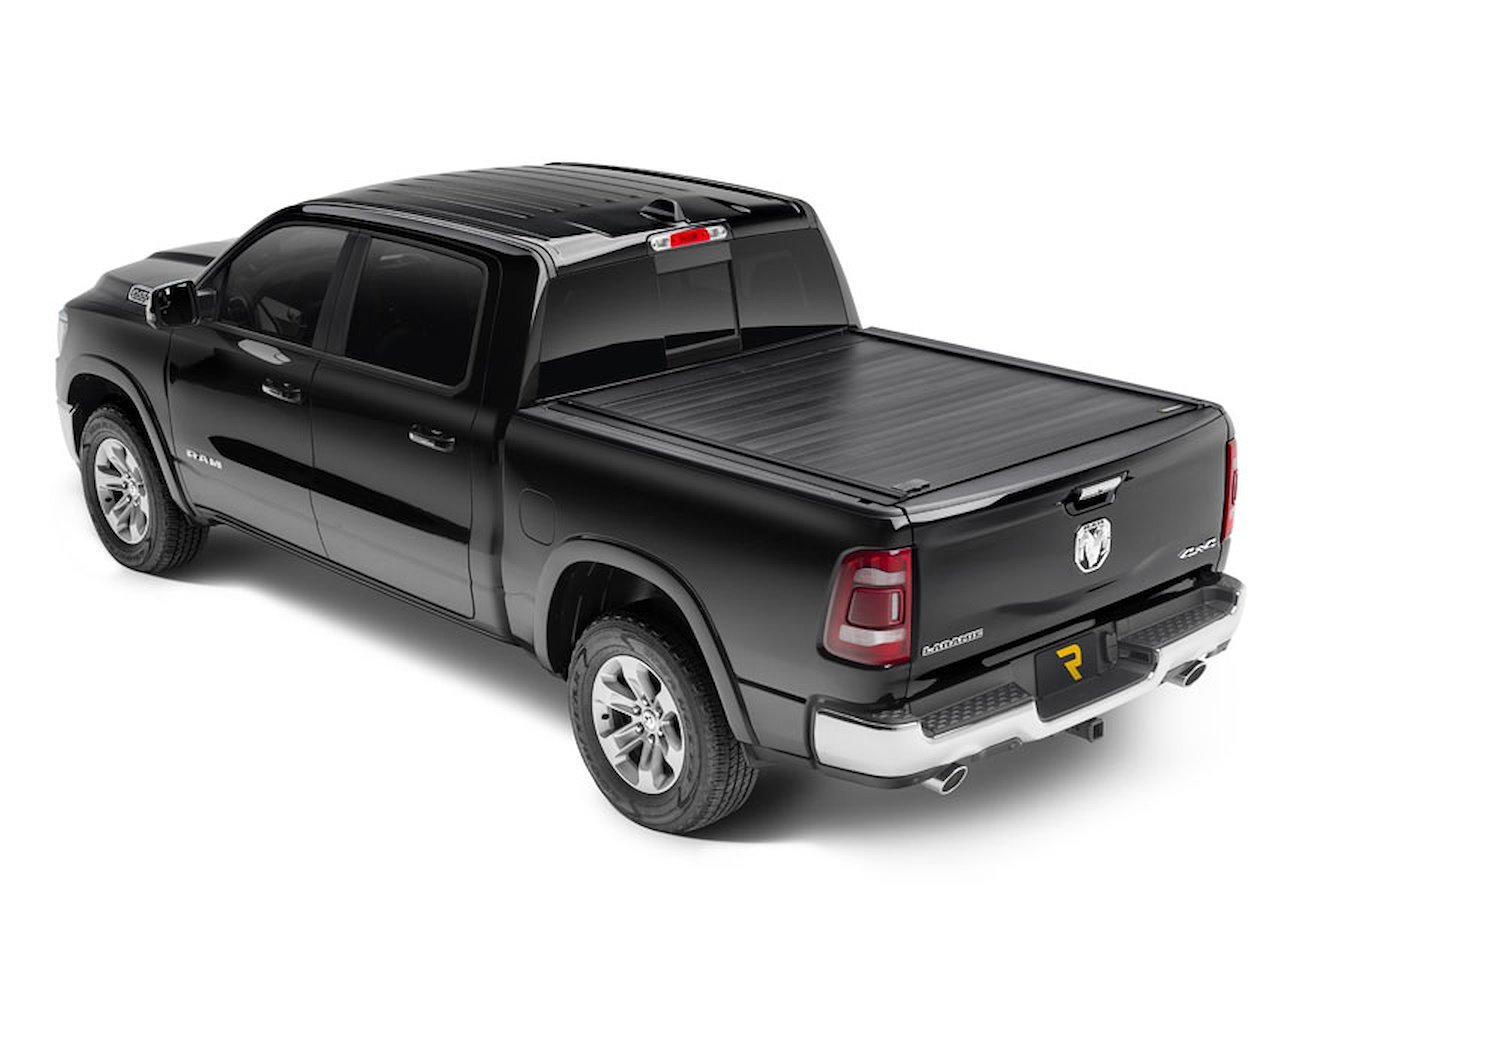 80233 RetraxPRO MX Retractable Tonneau Cover Fits Select Dodge/Ram 1500/2500/3500 8' Bed without Stake Pockets